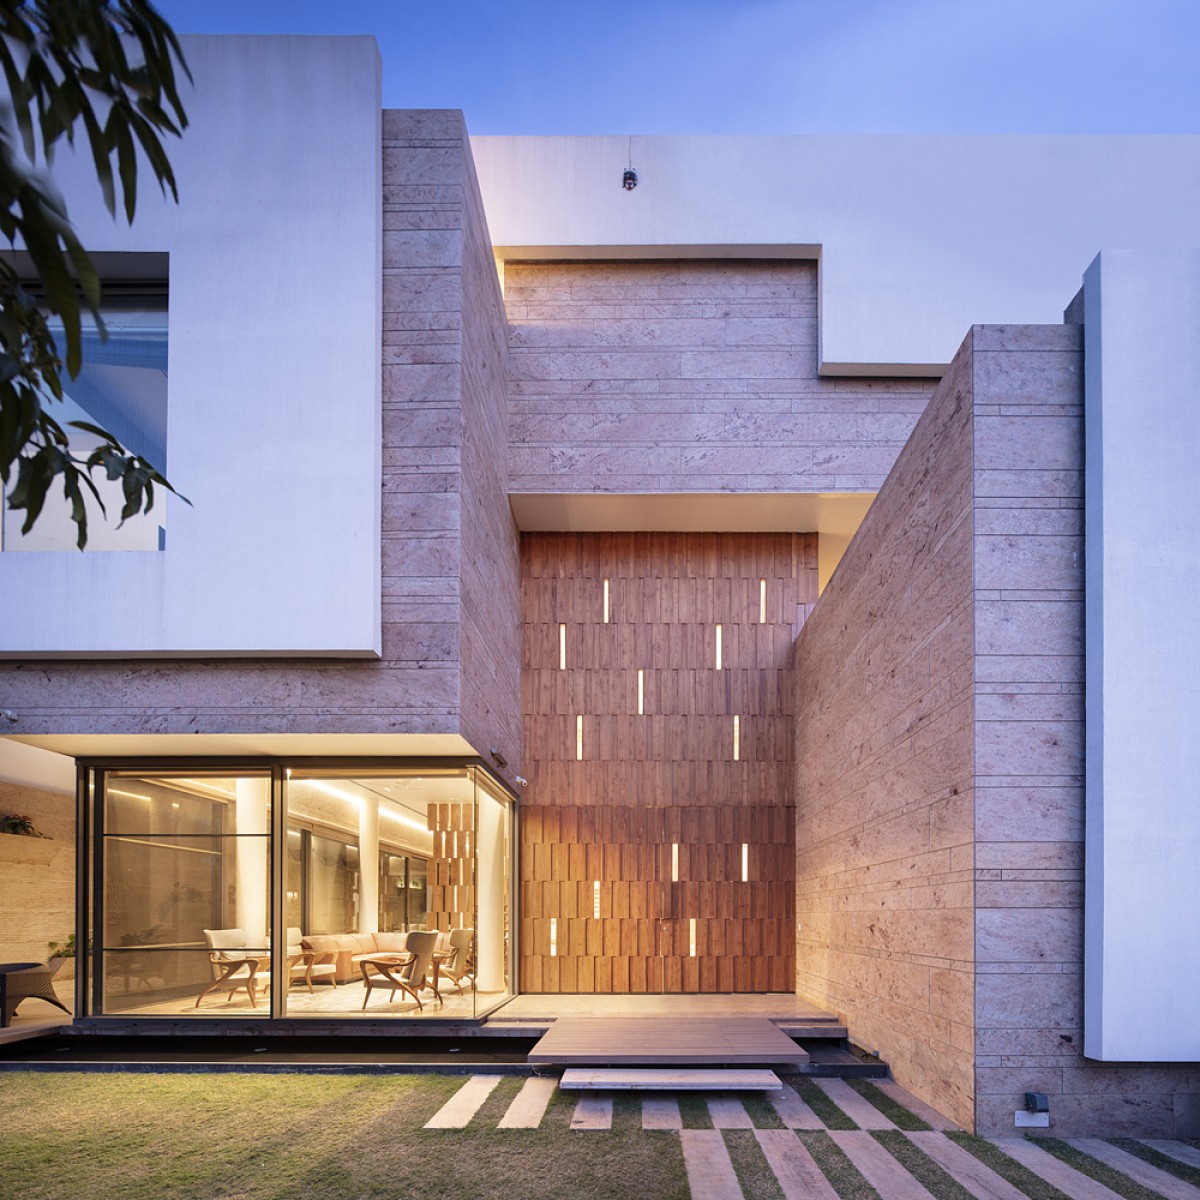 Dusk light exterior view of Residence 35 by Charged Voids